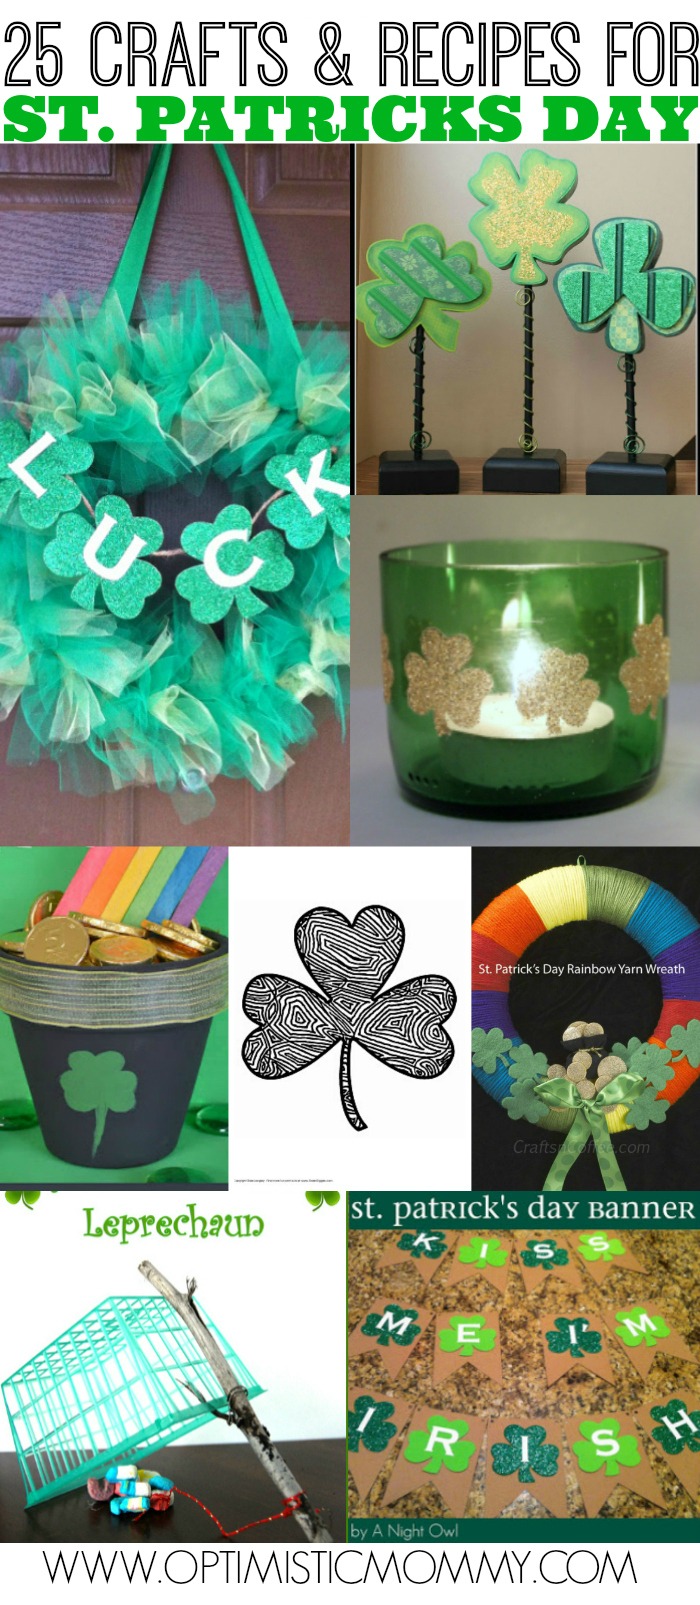 25 Crafts & Recipes for St. Patrick's Day | Optimistic Mommy